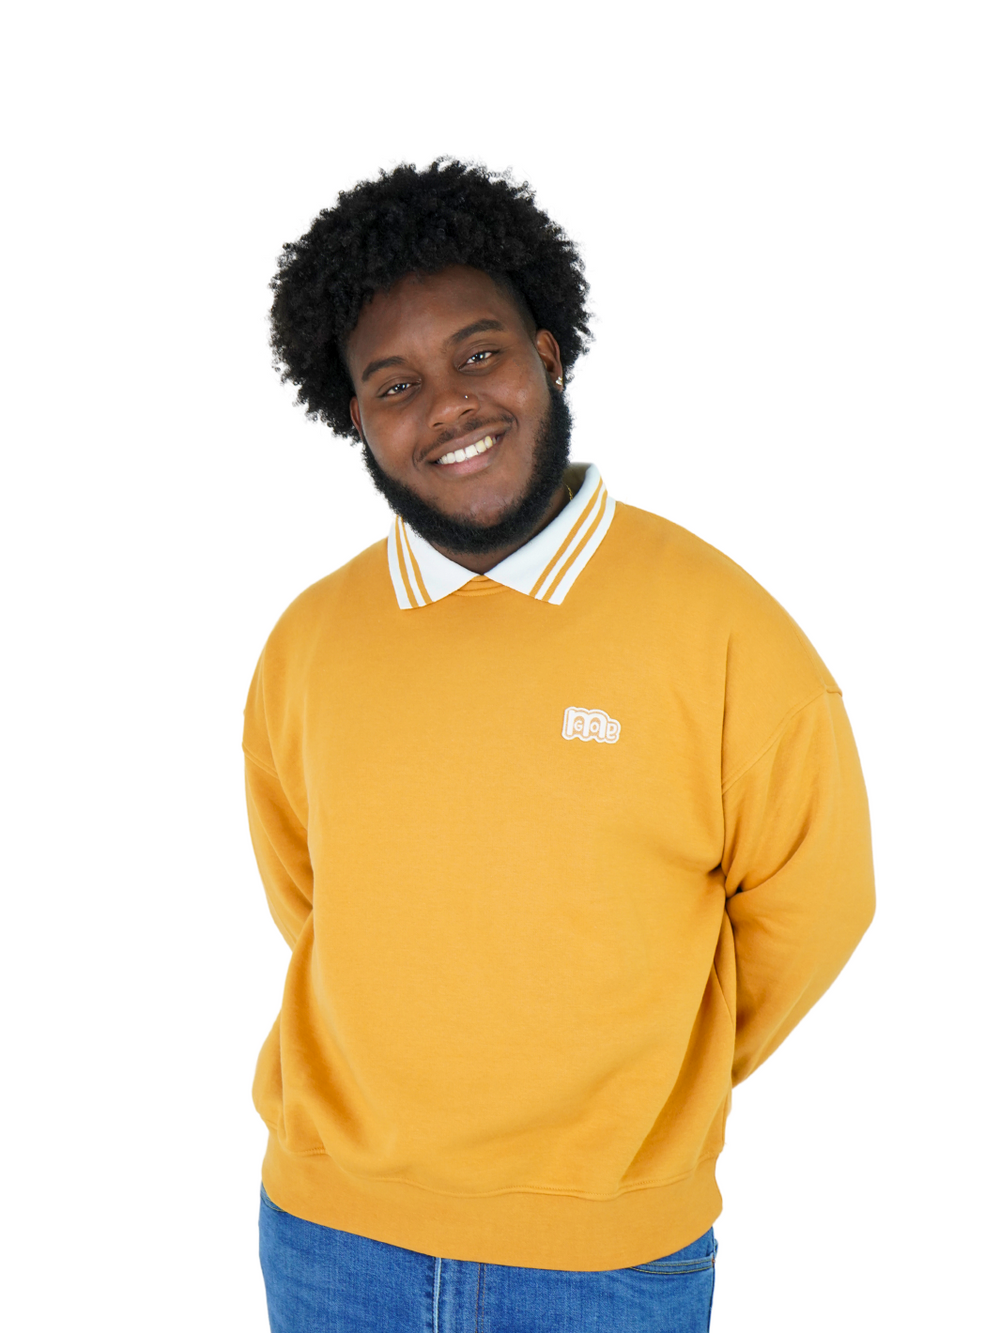 Incredibly comfortable and stylish Oversized Collared Crewneck in Gold with the attached collar. The GODinme patches on front and back represent your Faith boldly.